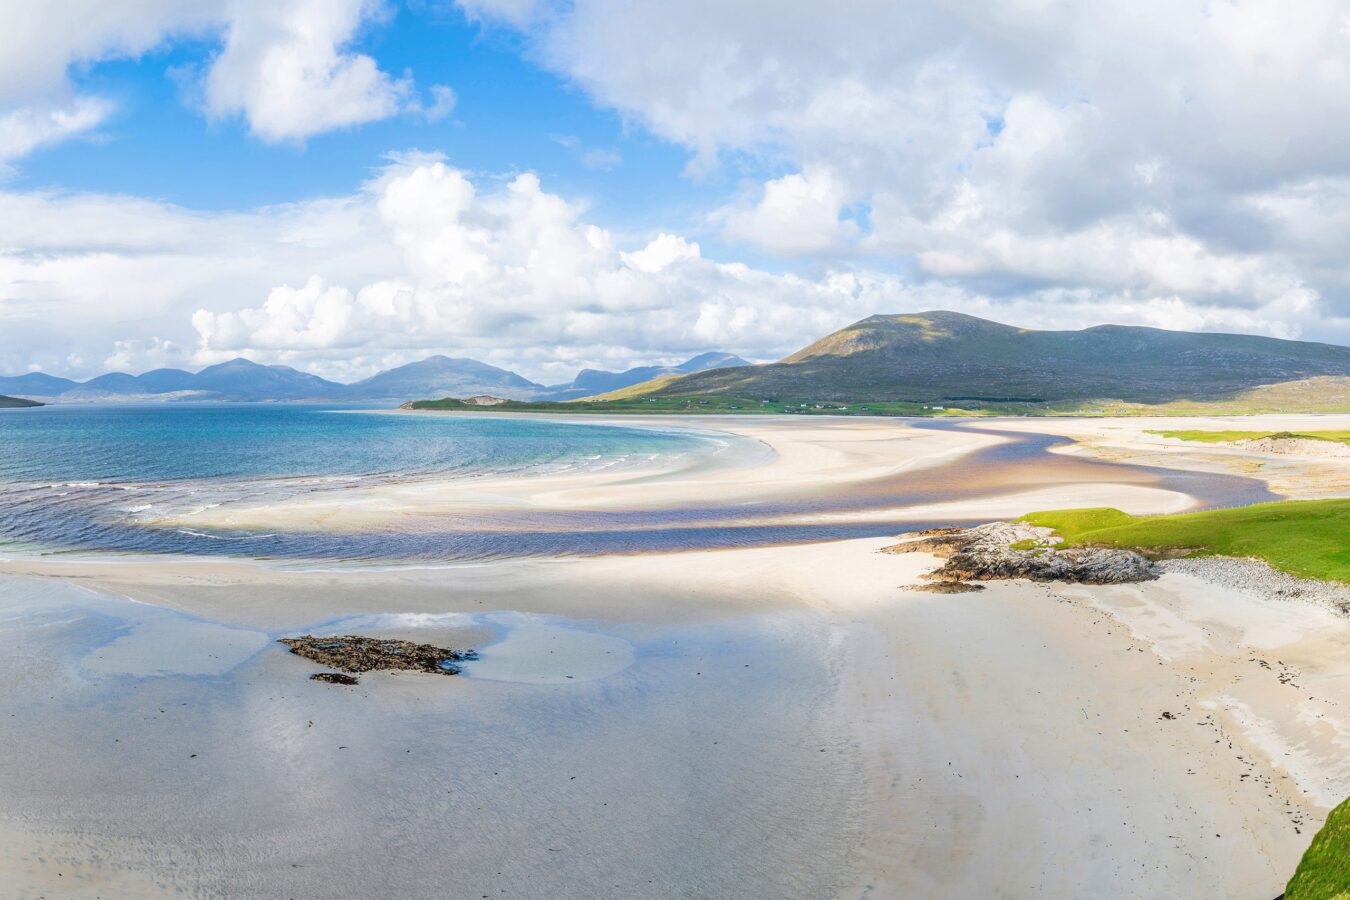 Luskentyre Beach: A pristine Scottish coastal paradise with turquoise waters, golden sands, and scenic hills.